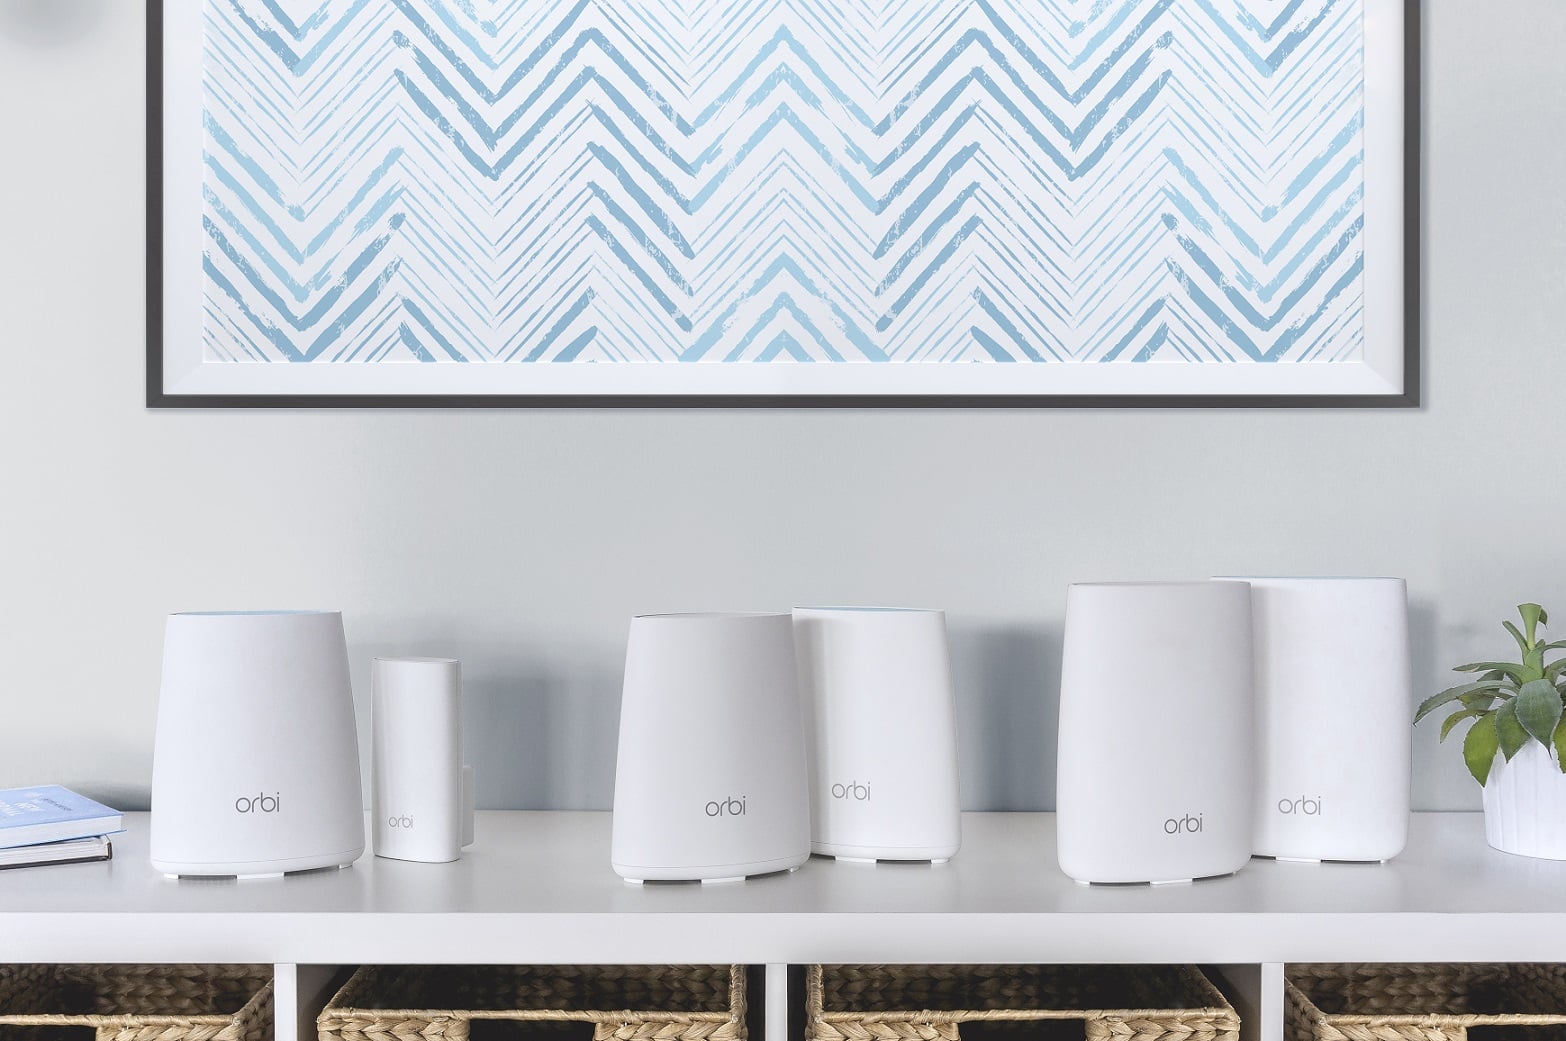 Netgear Expands Orbi Mesh Wi-Fi Lineup with New Kits, Lower Entry Pricepoint